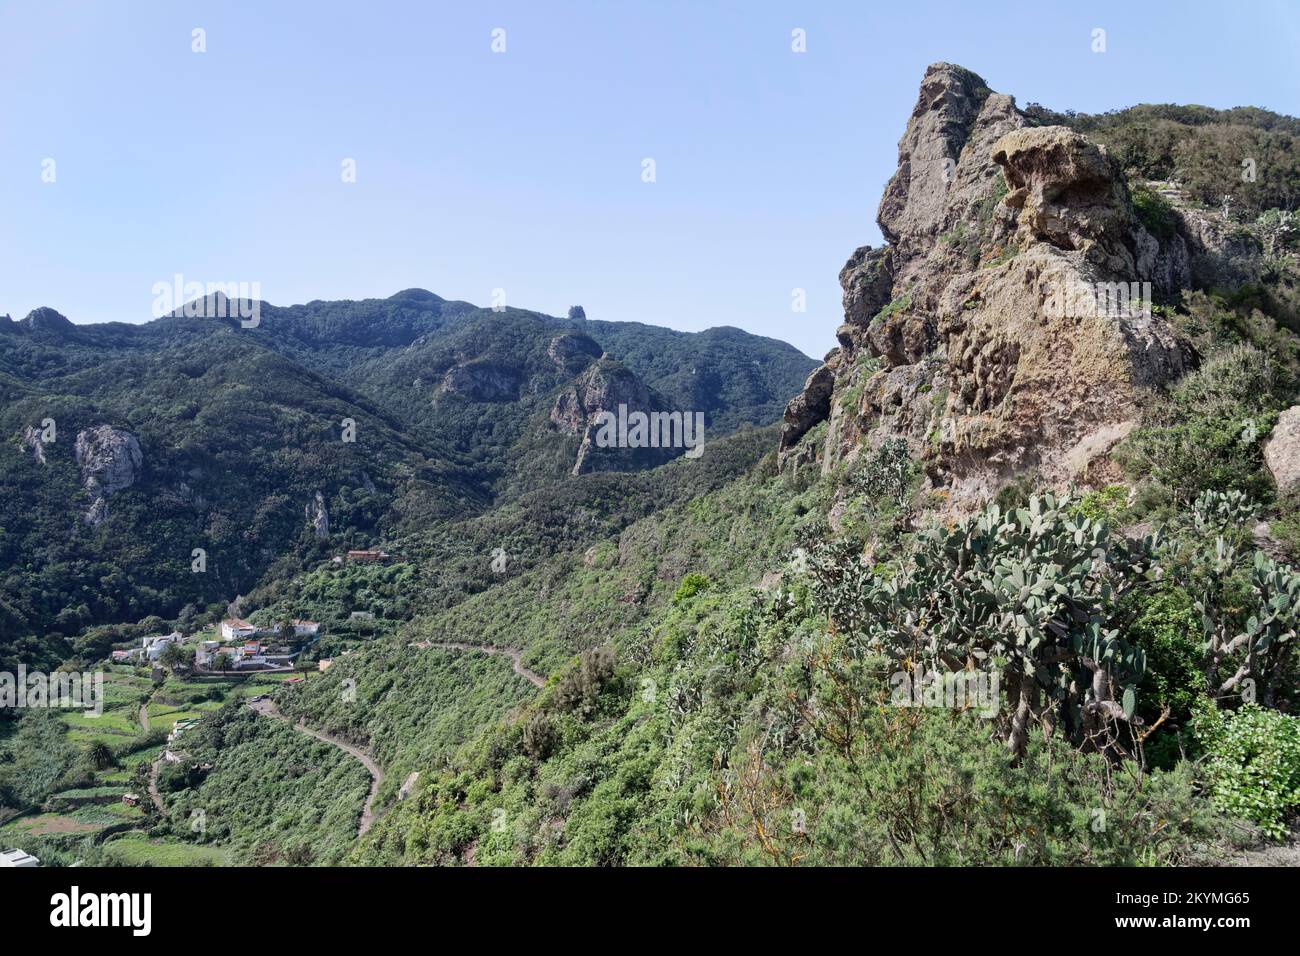 Overview of Chamorga village with Roque Bichuelo peak in the foreground, Anaga mountains, Tenerife, Canary Islands, Spain, November. Stock Photo